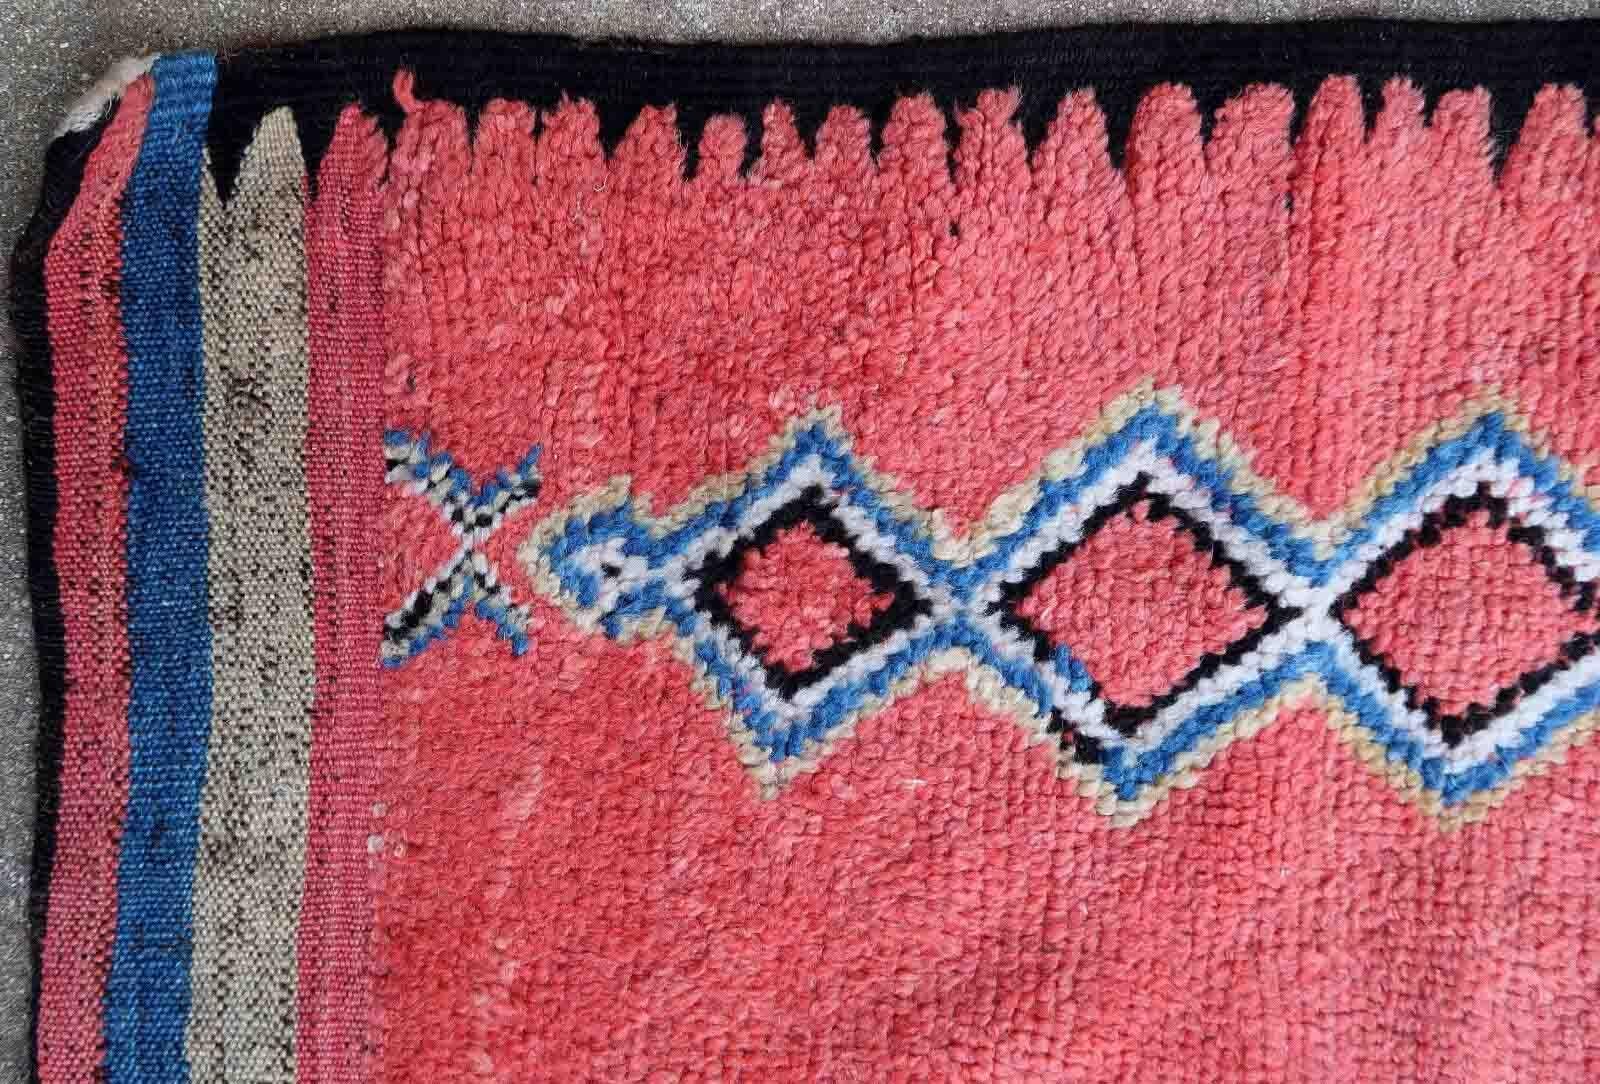 Handmade vintage rug from Morocco in Berber style and raspberry color. The rug is from the beginning of 20th century made by the Ouled Bou Sbaa tribe in the region of Chichaoua in Morocco. It is in original good condition.

-condition: original